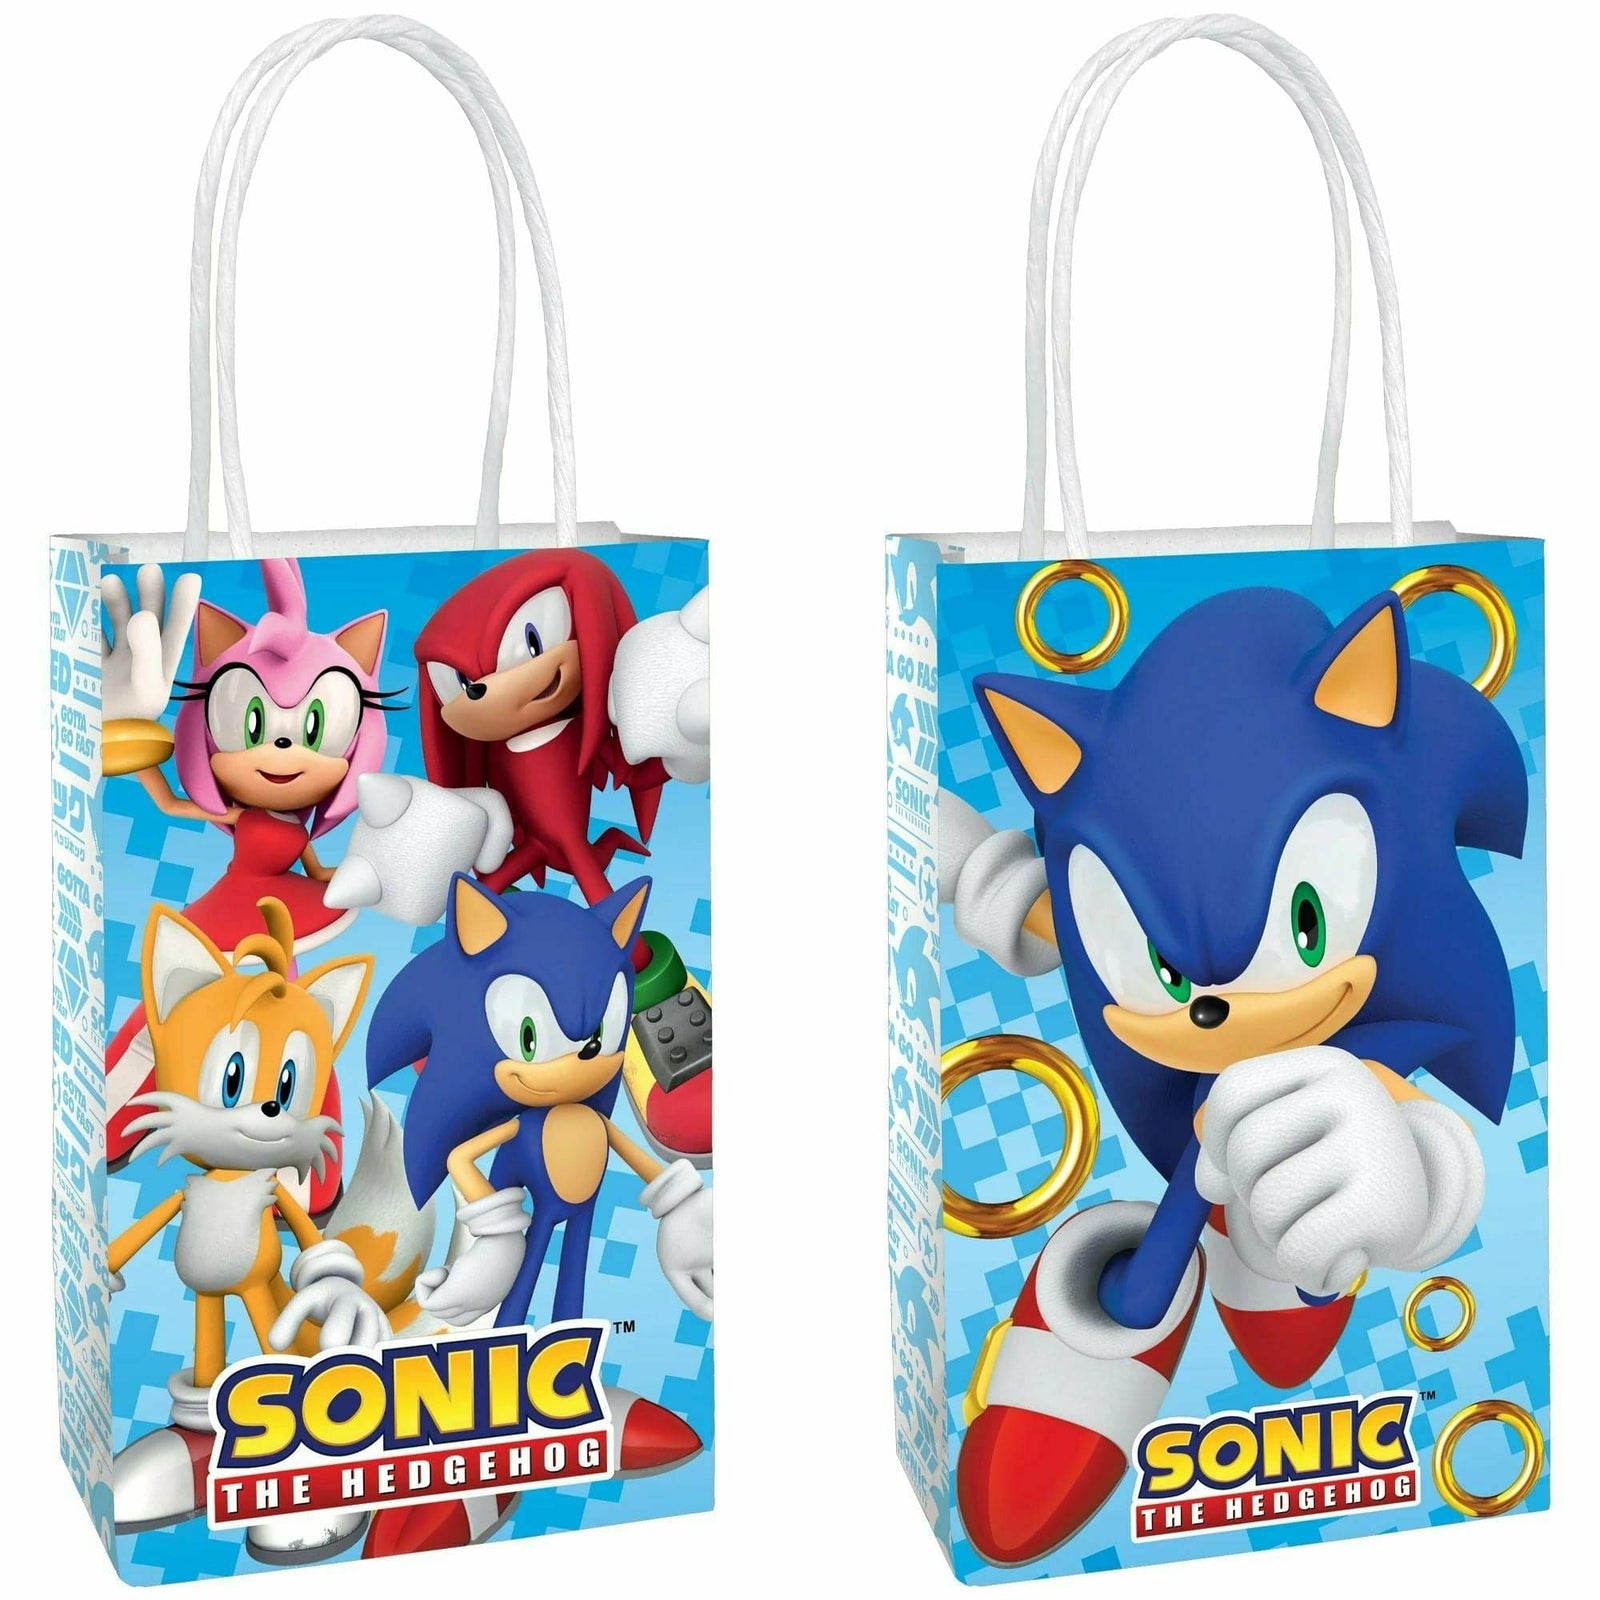  Sonic The Hedgehog Party Pack Seats 8 - Napkins, Plates, and  Cups Sonic The Hedgehog Party Supplies : Home & Kitchen